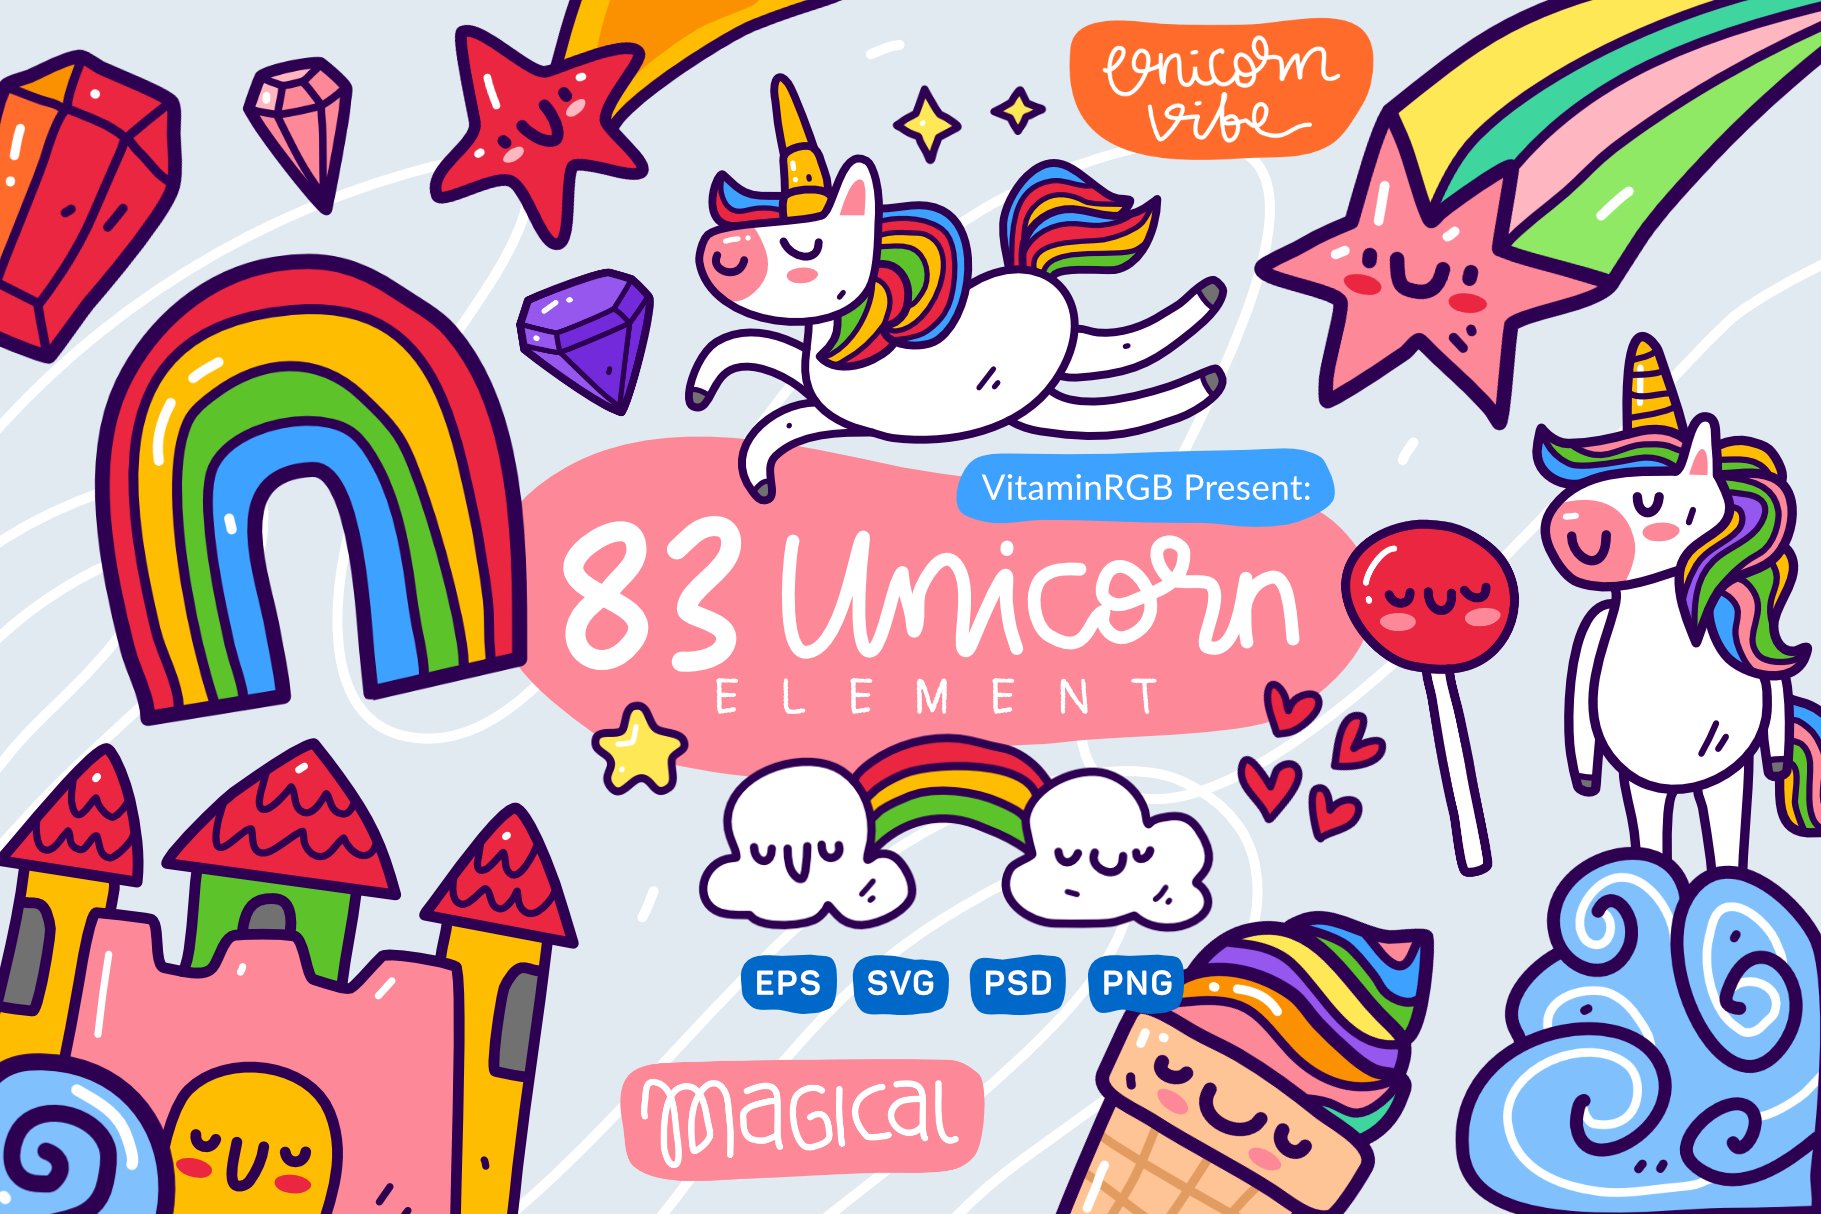 Unicorn Doodle Pack cover image.